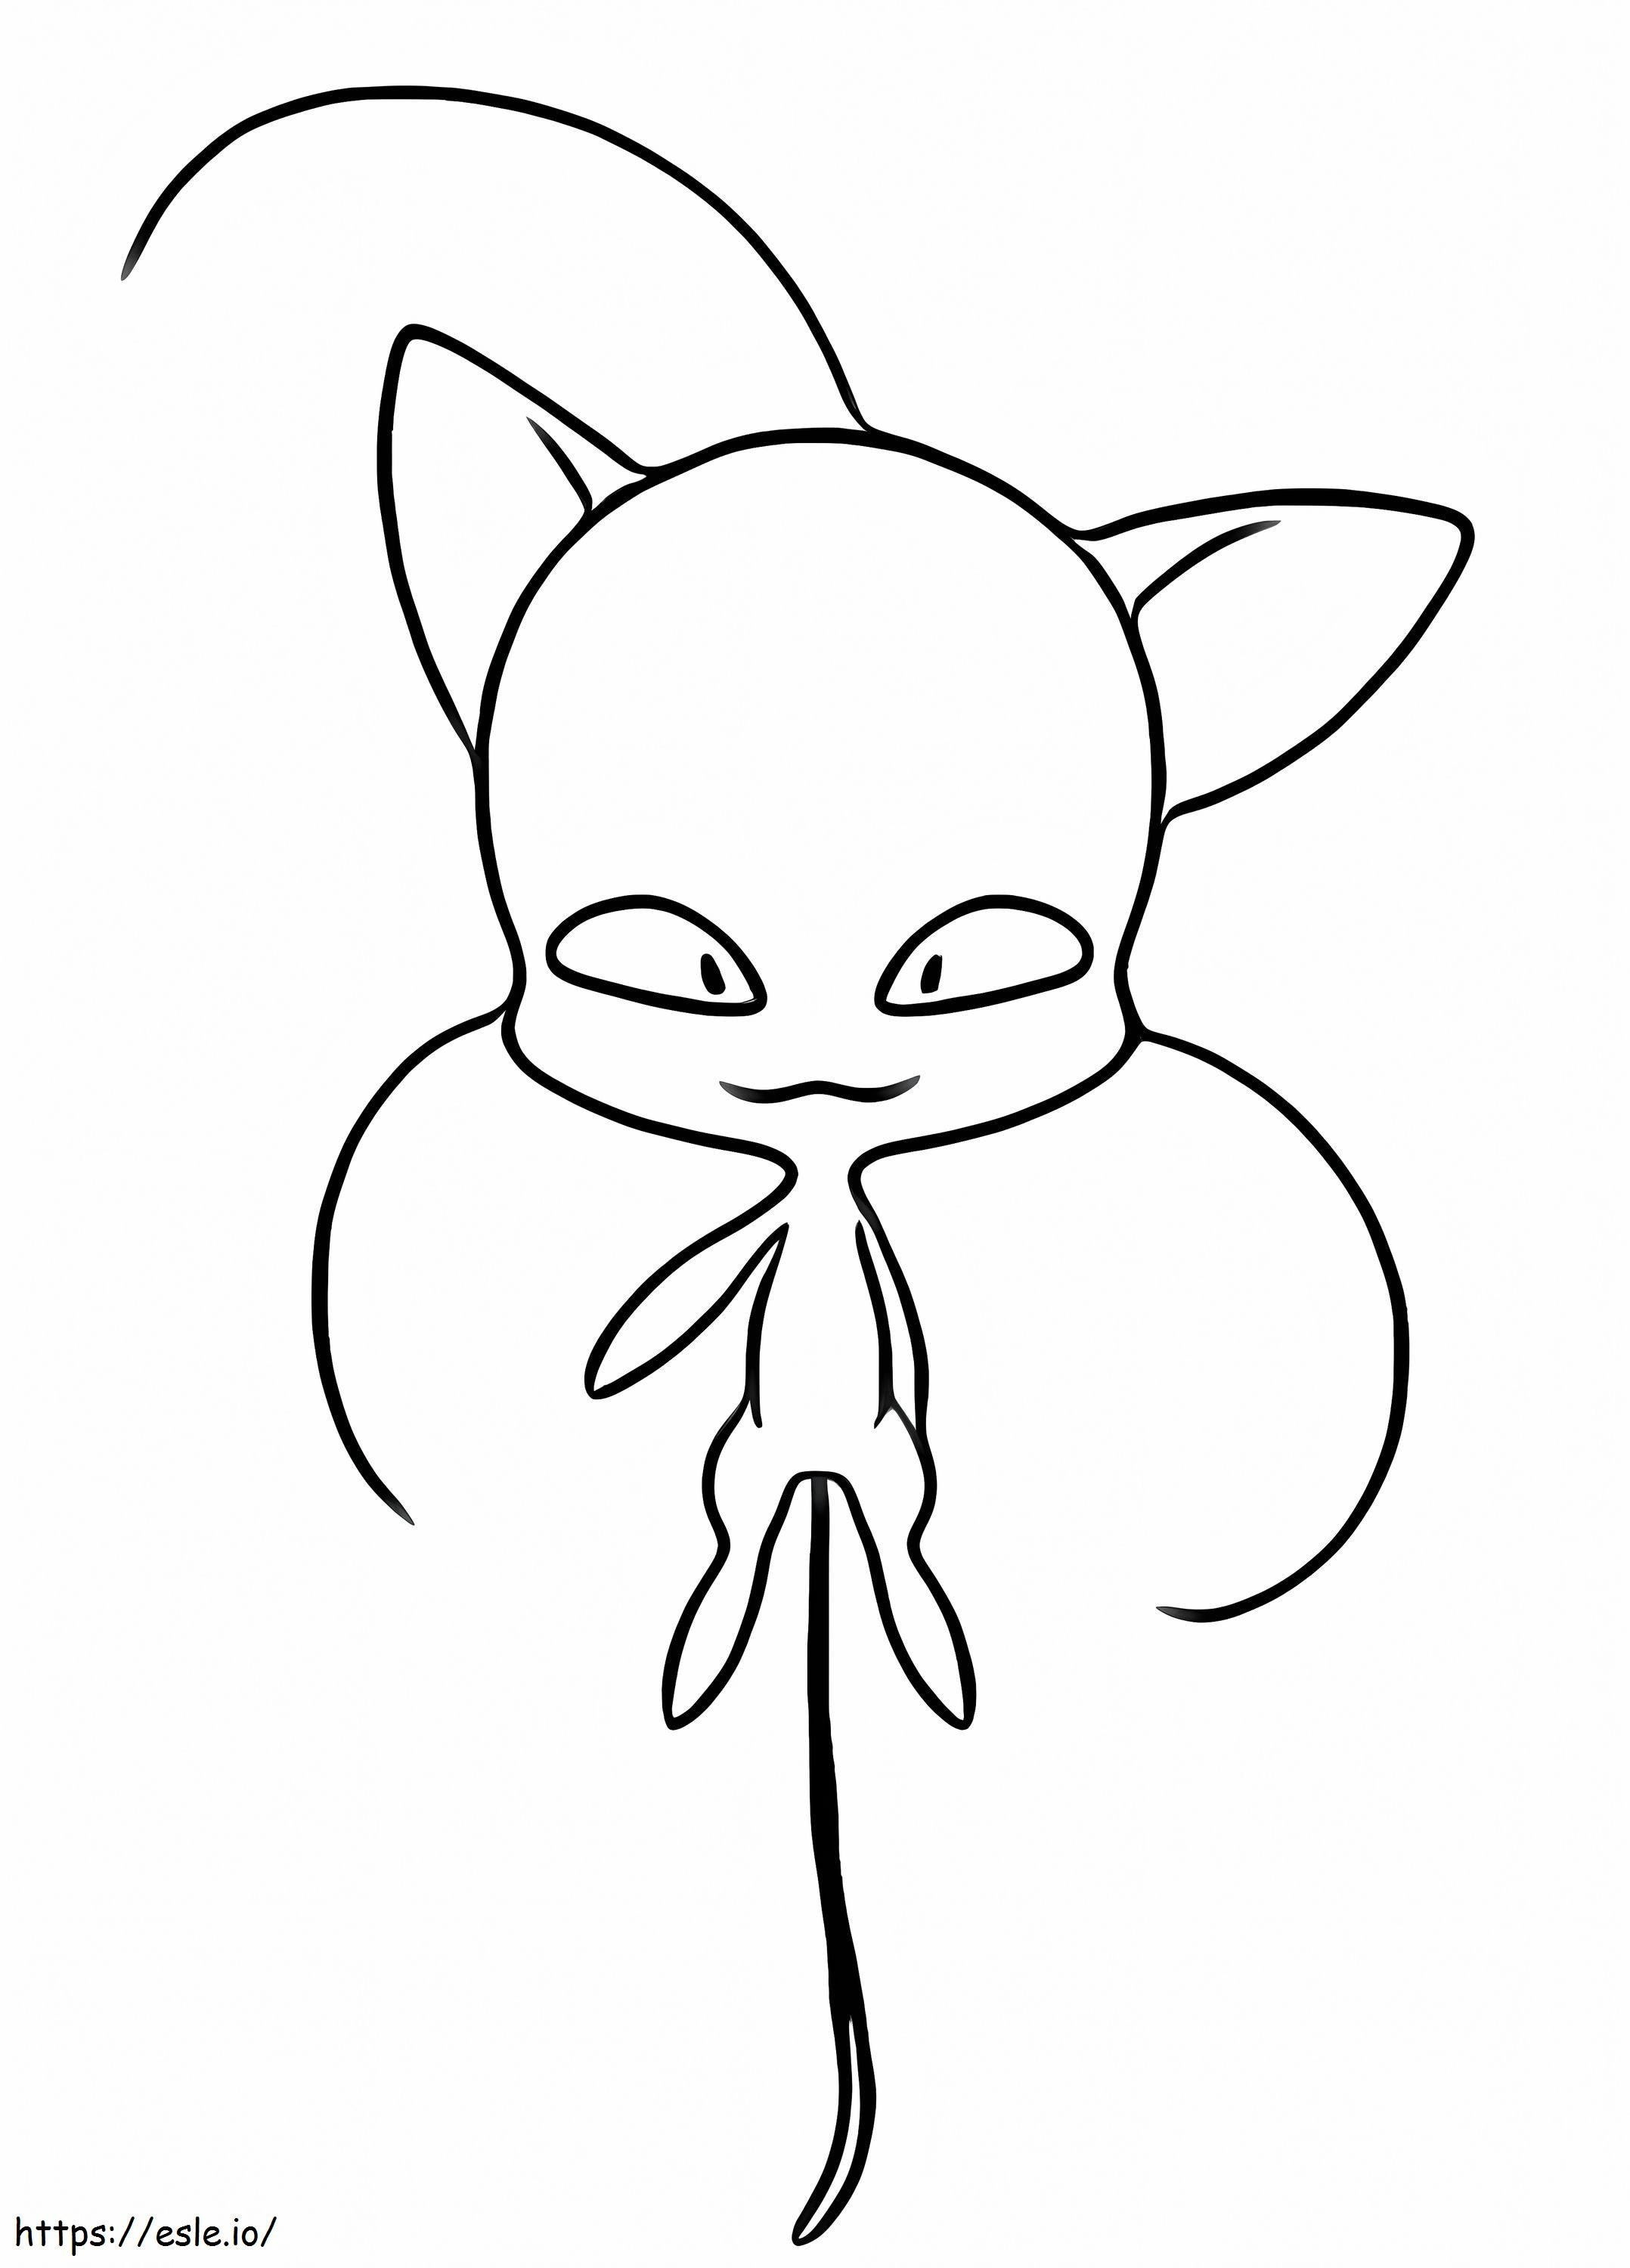 Plagg To Me coloring page